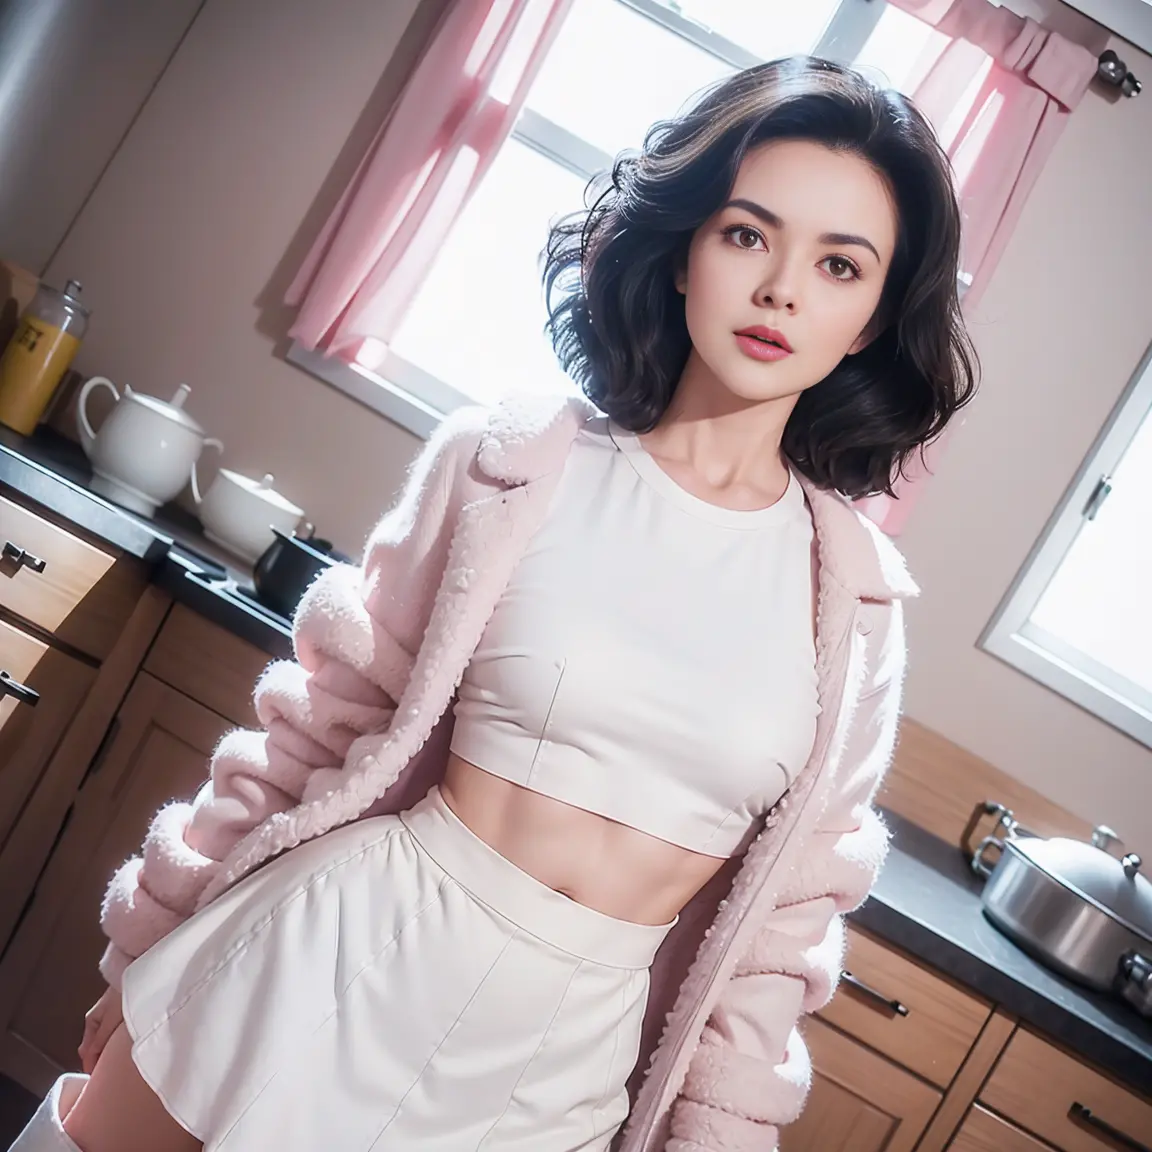 gorgeous cute Austrian girl, (crop  top), black hair loose  hair, wears a pink top , pink boots, standing in kitchen, white fluf...